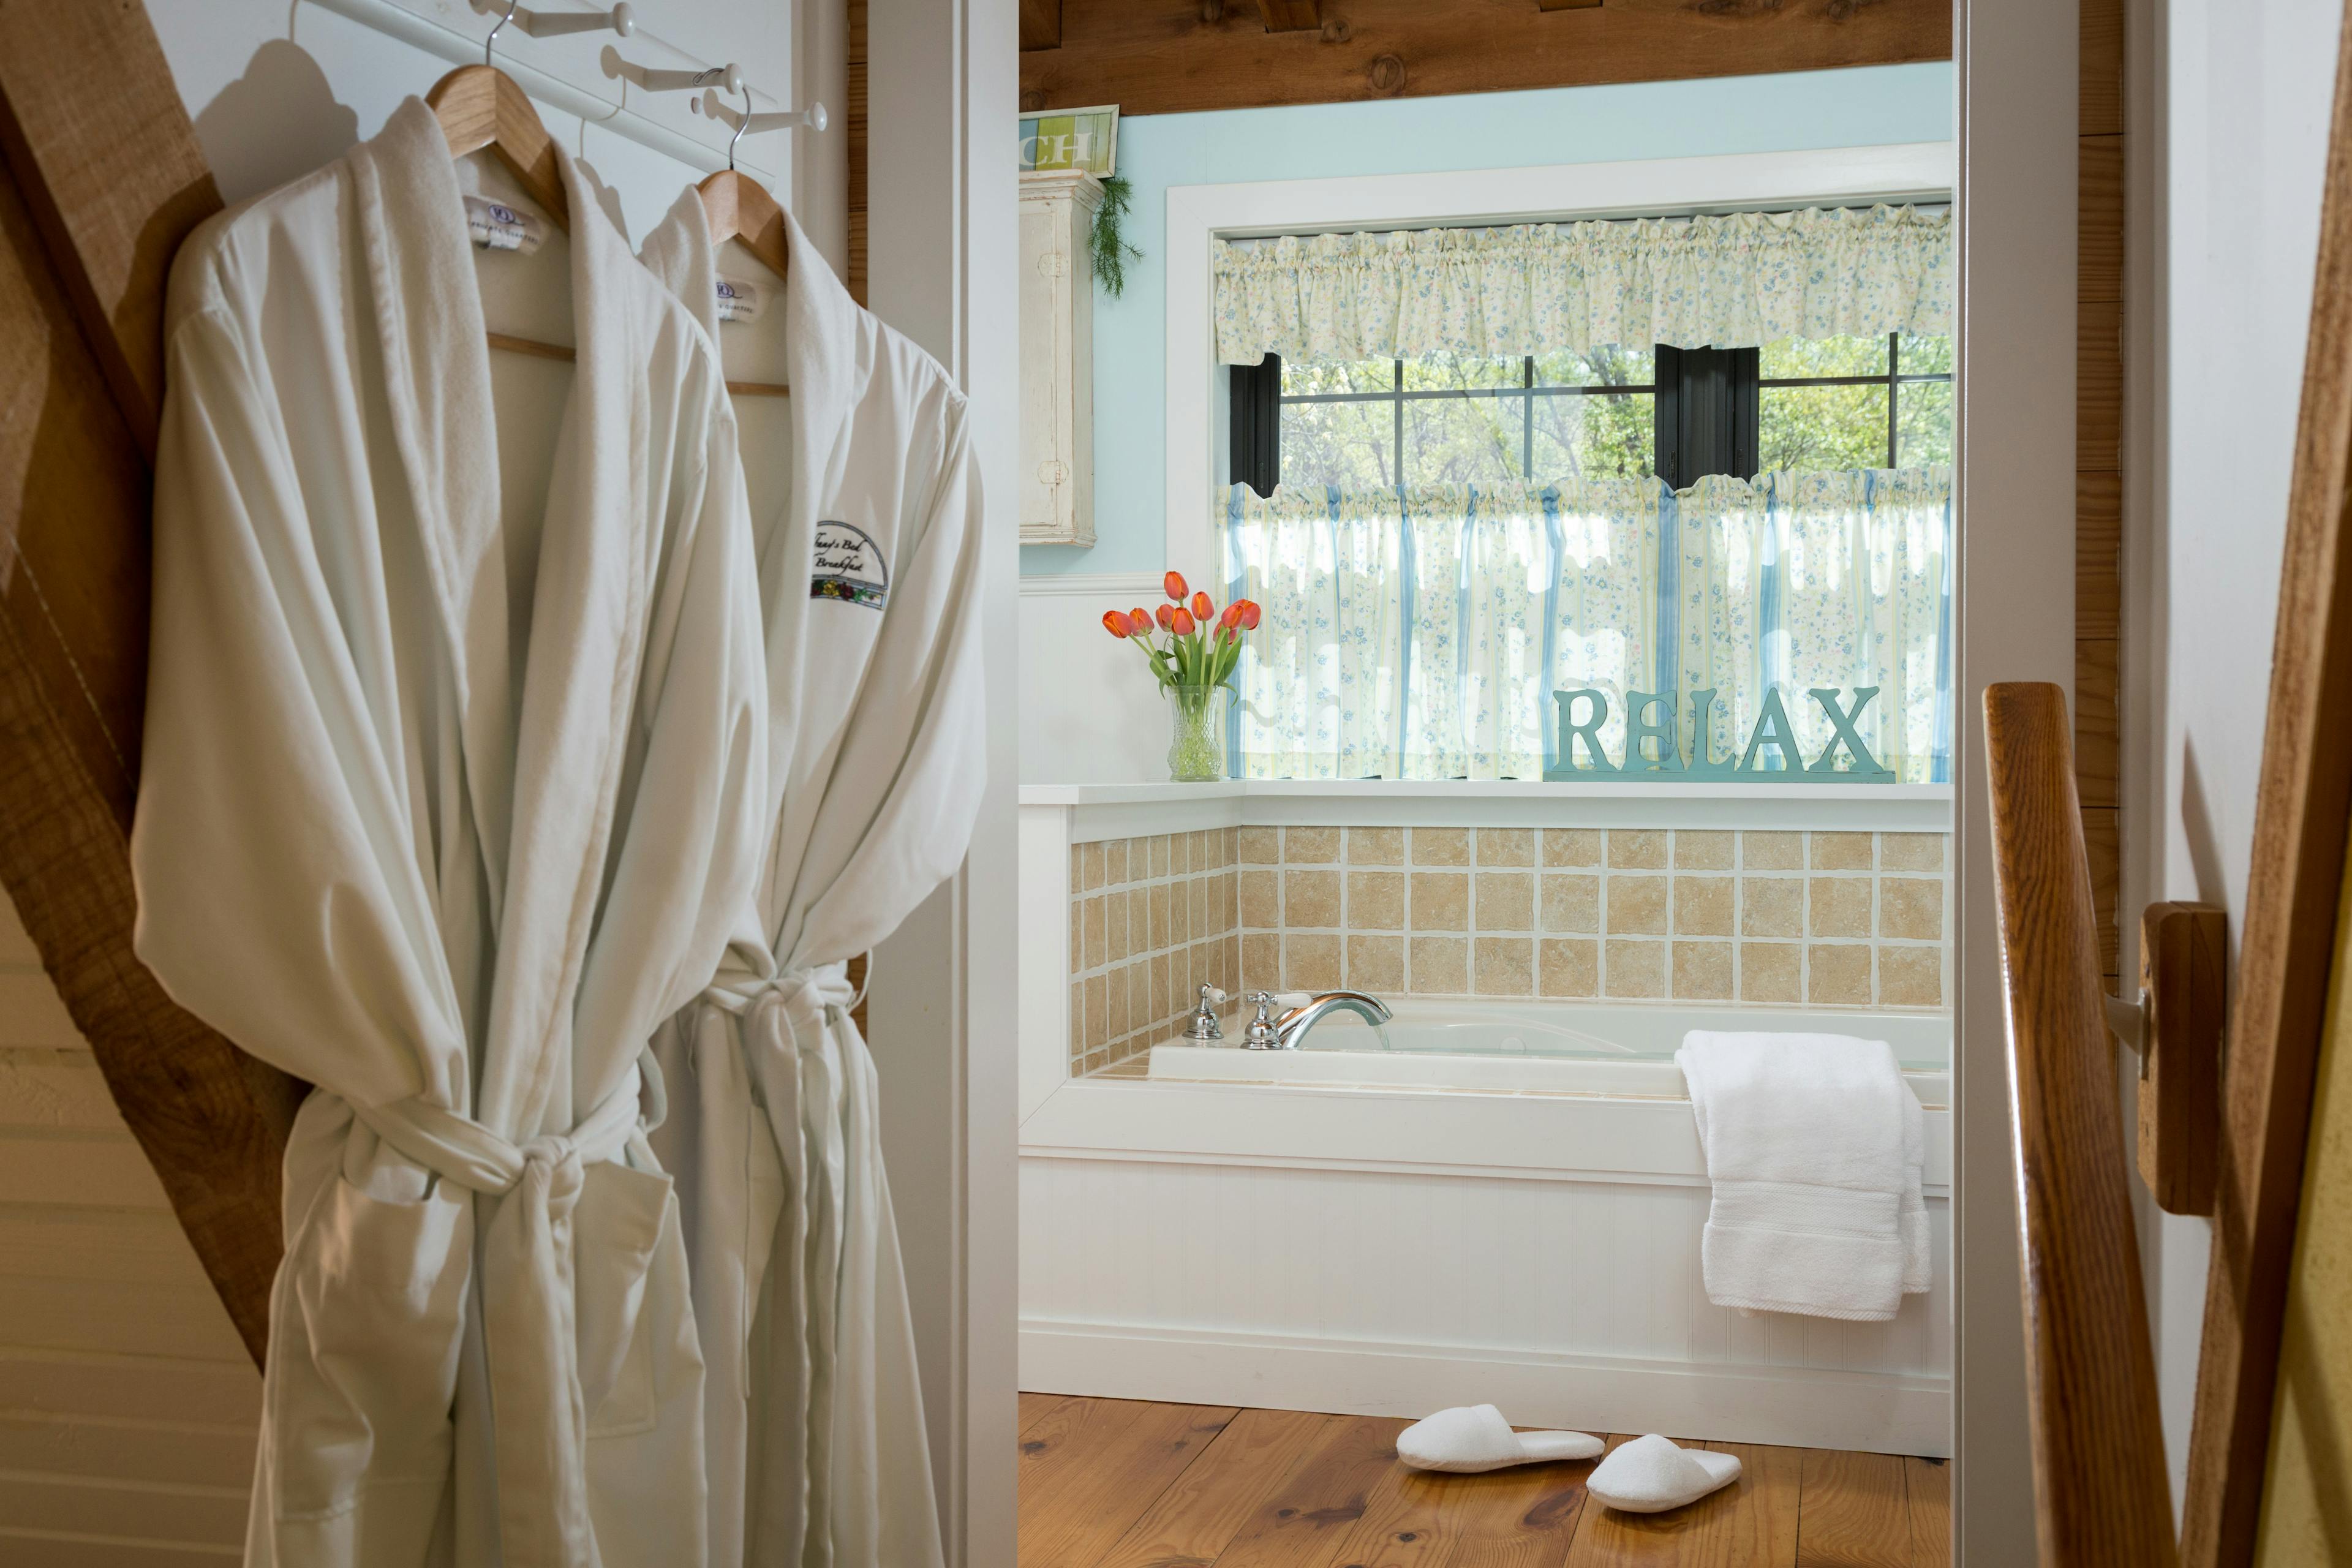 Two white robes hanging on a wall beside stairs leading to a bathroom with a wooden floor.  In the bathroom is a jetted tub with white towels hanging off the edge.  There is a pair of white slippers in front of the tub.  Behind the tub are two windows covered with blue & yellow curtains.